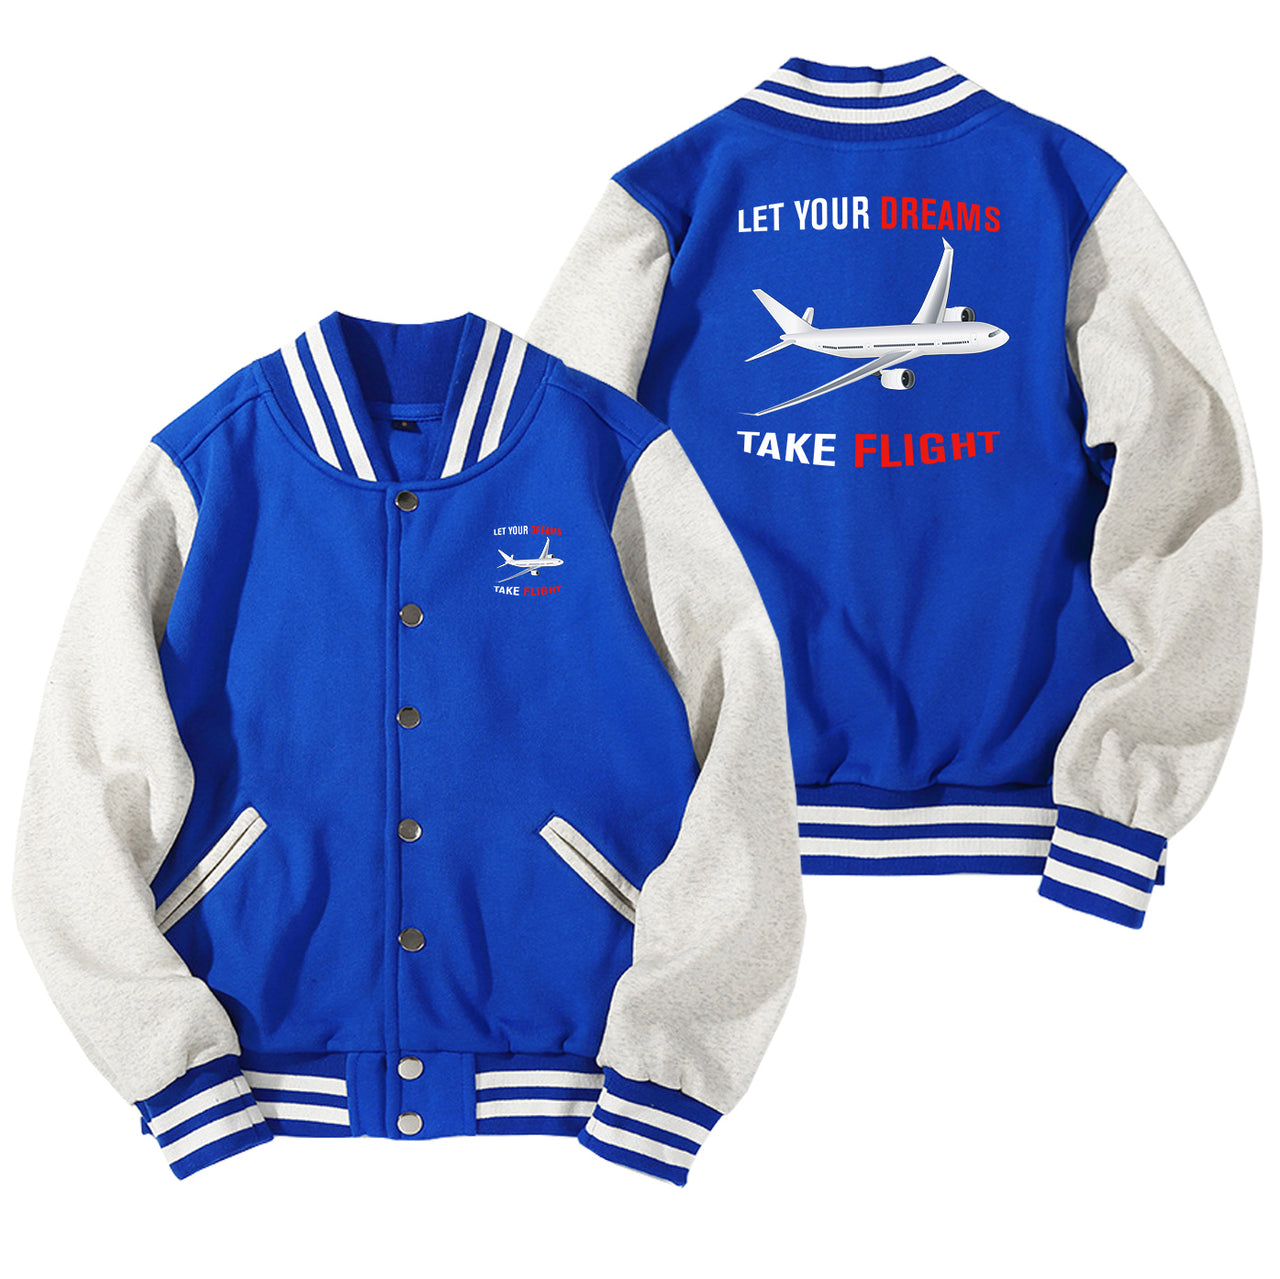 Let Your Dreams Take Flight Designed Baseball Style Jackets